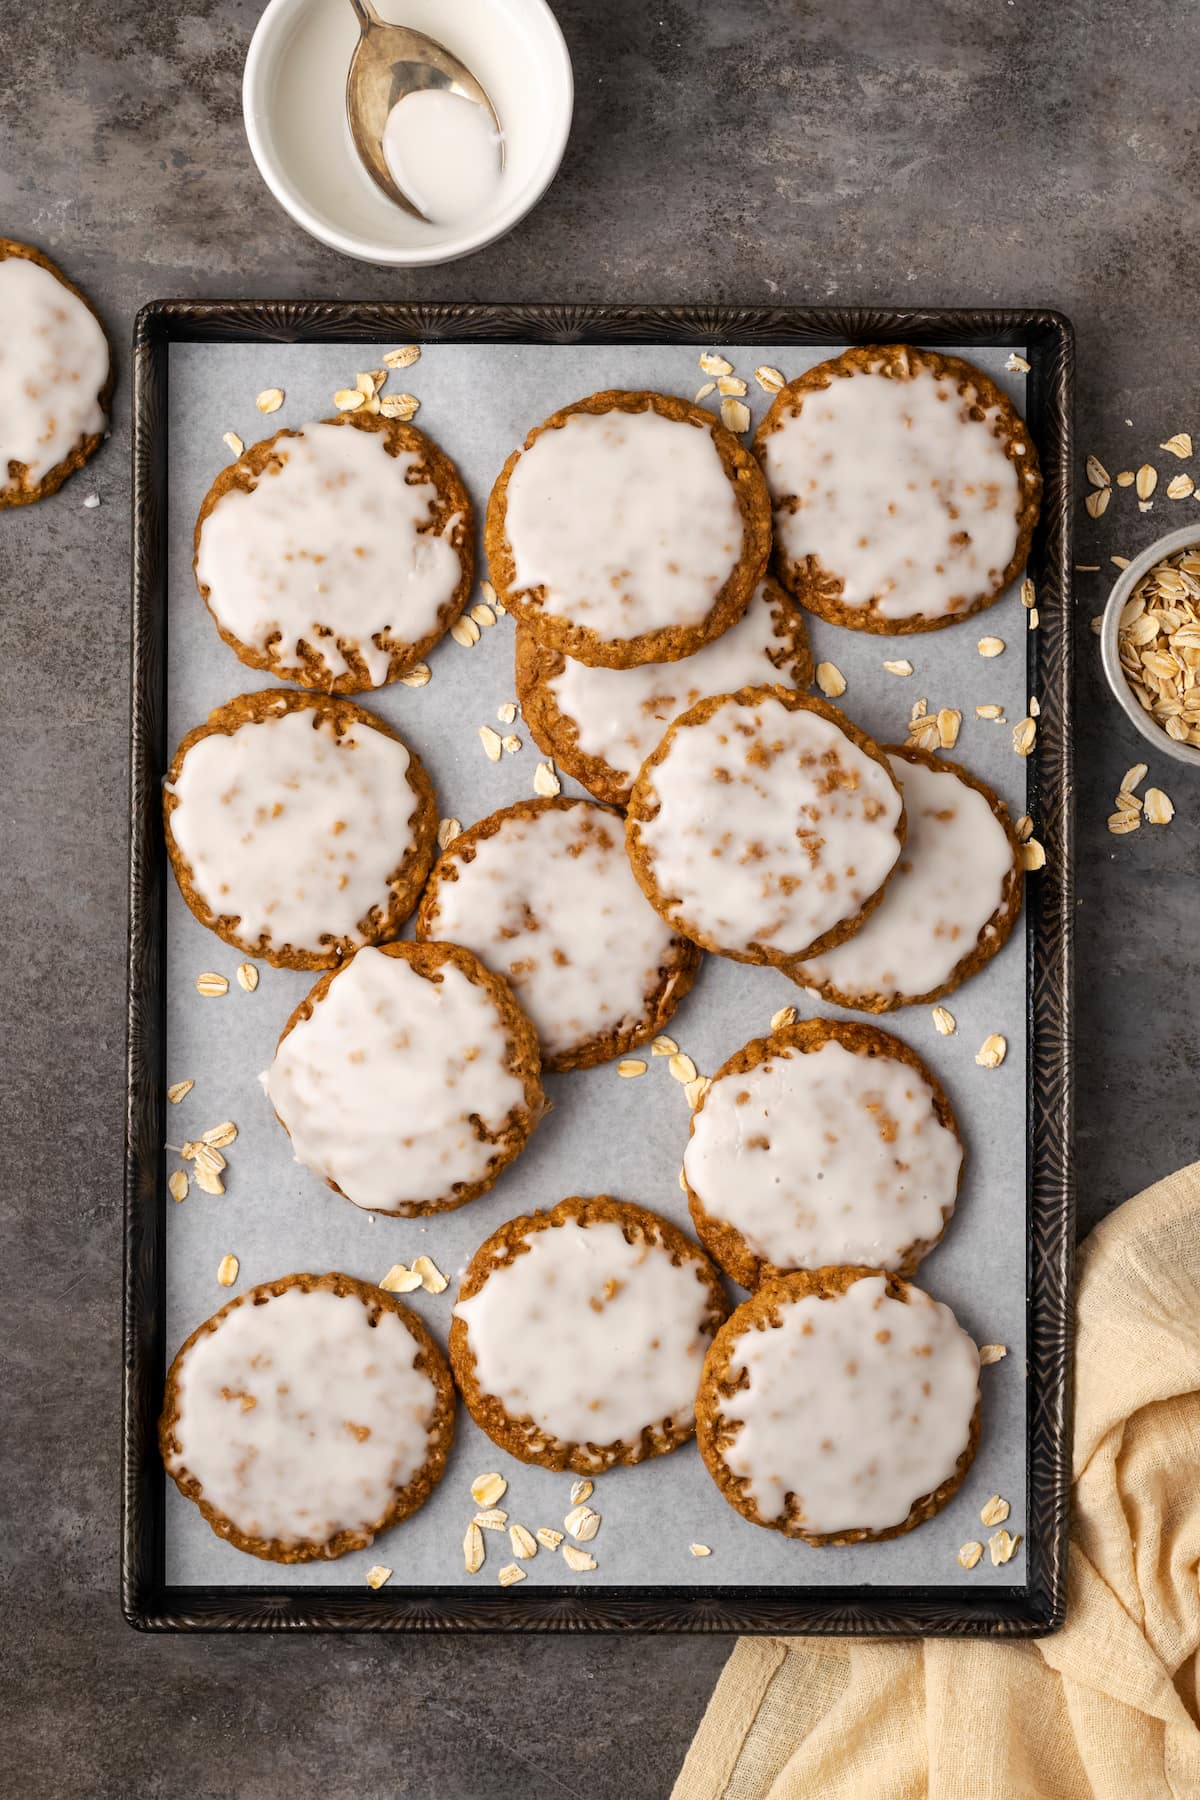 Overhead view of assorted iced oatmeal cookies scattered on a lined baking sheet.